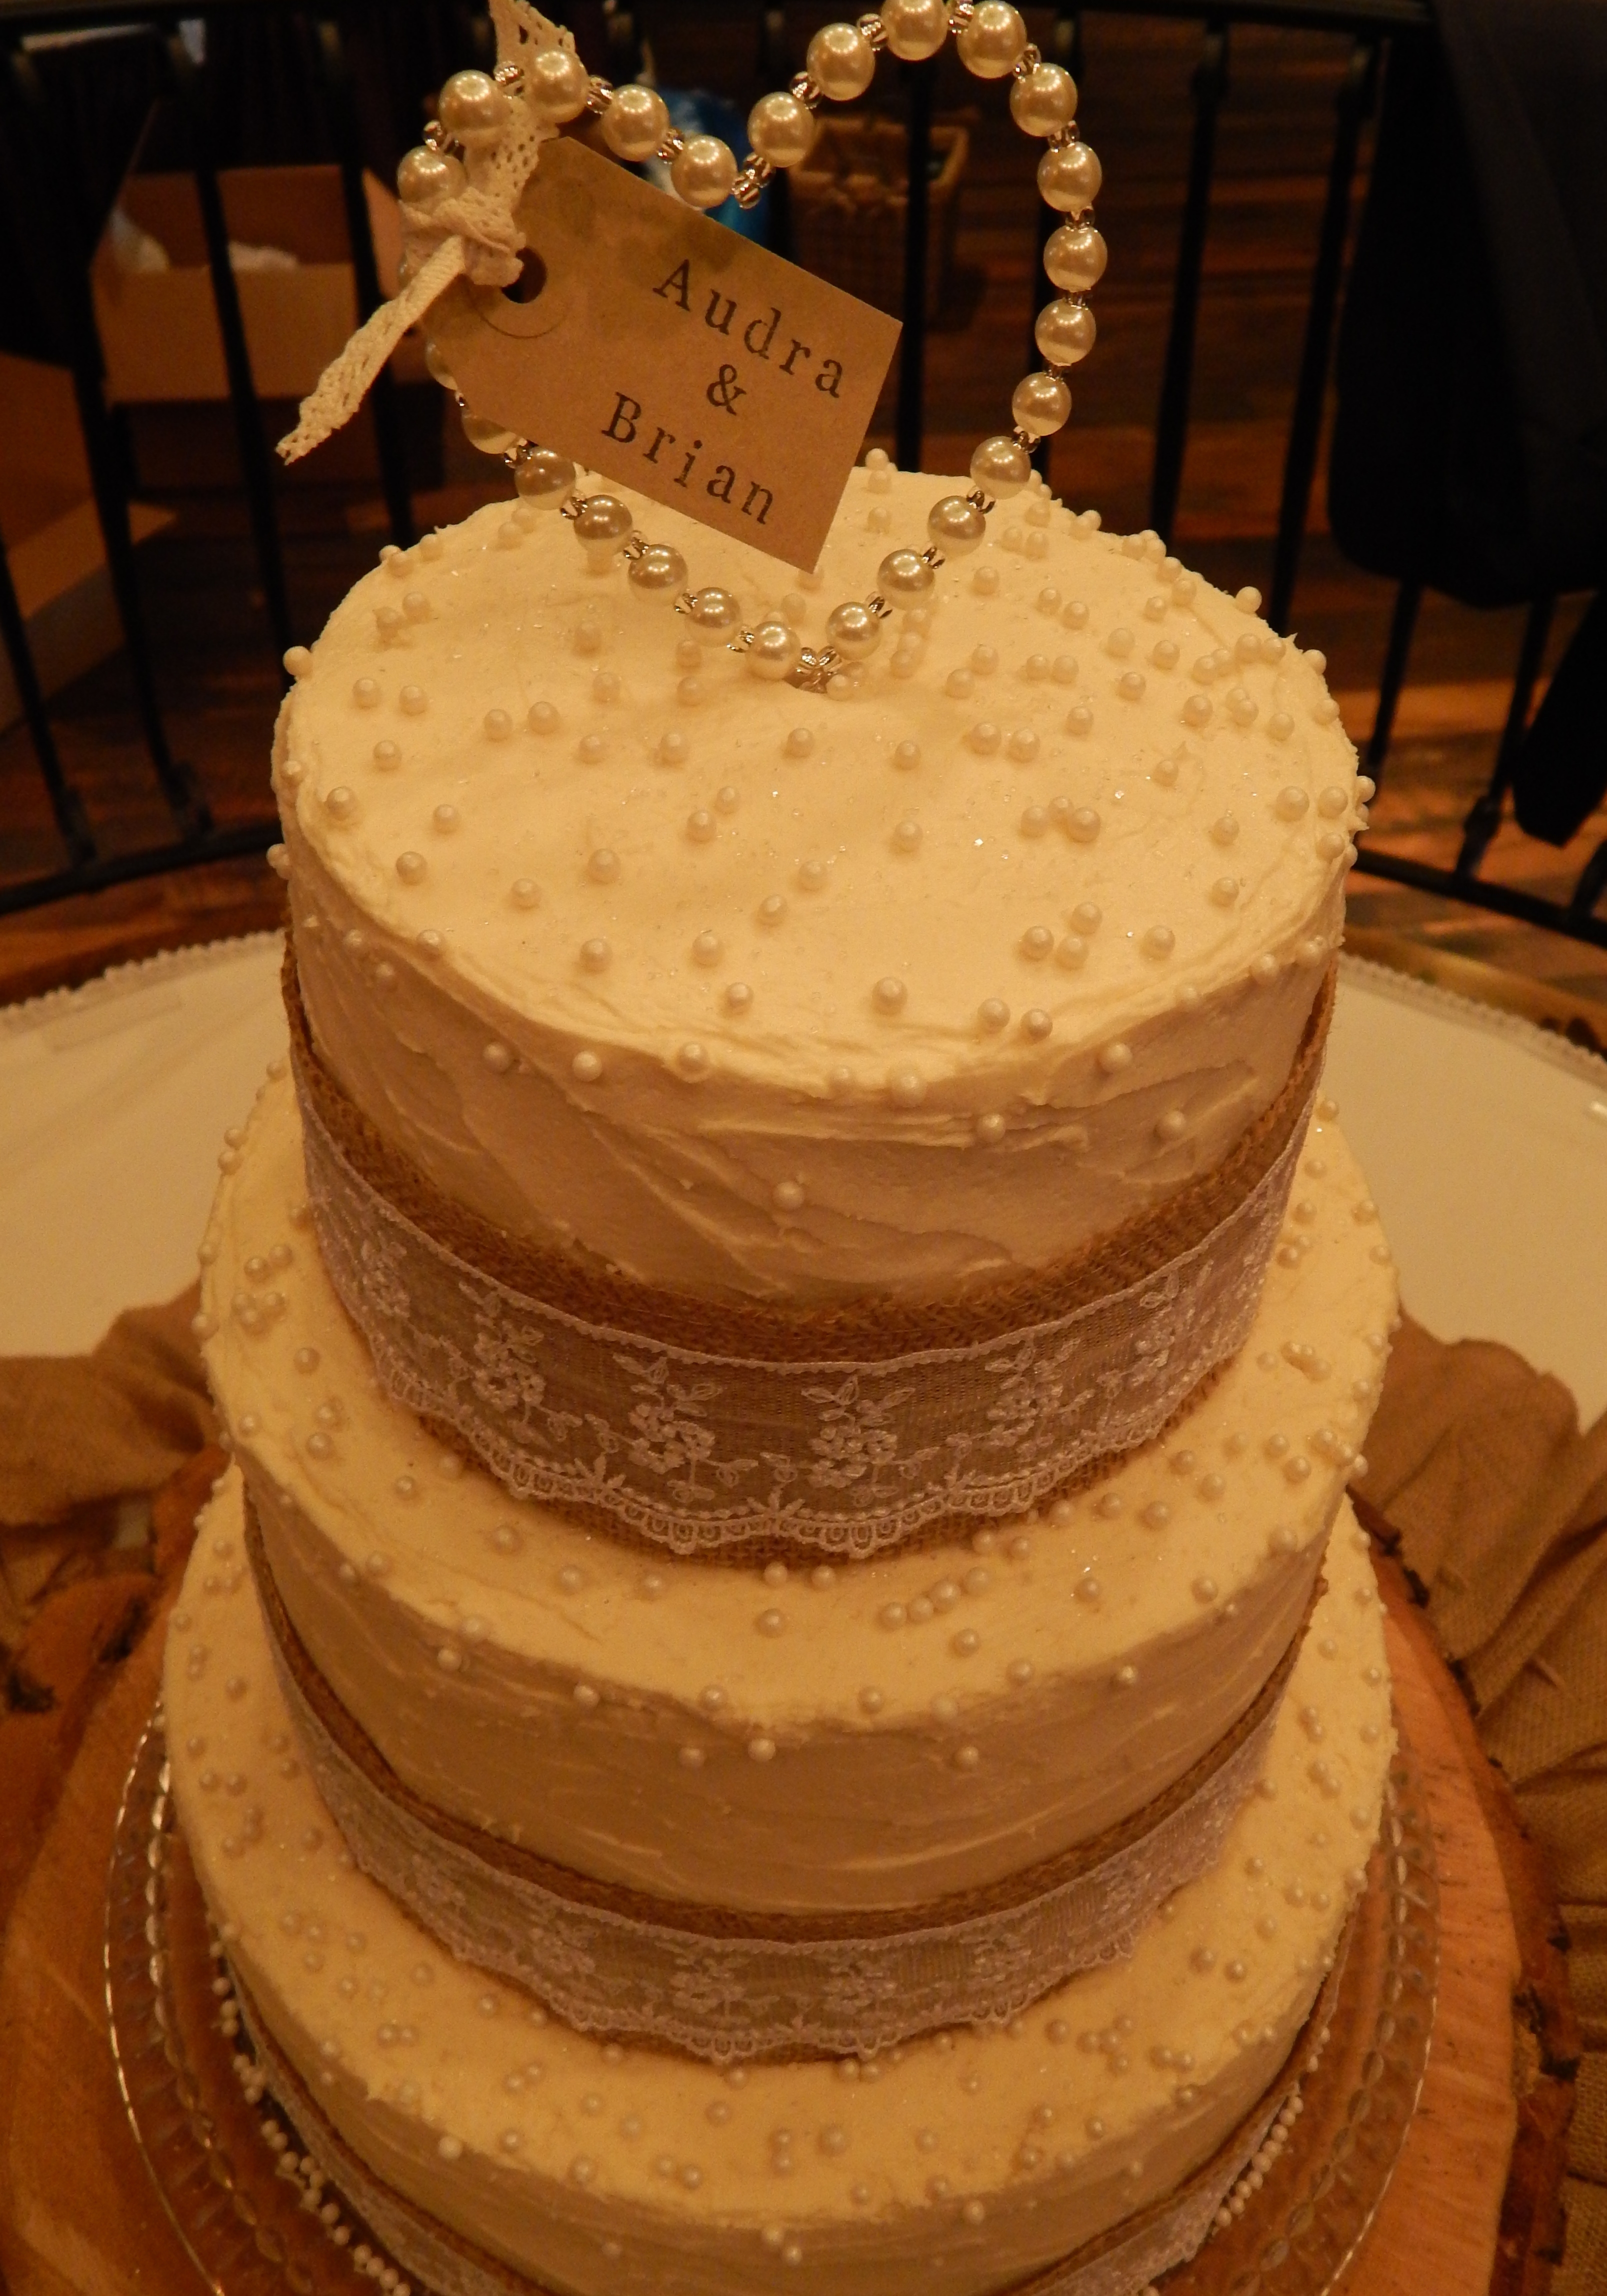 3 Tier Wedding Cake Burlap and Lace